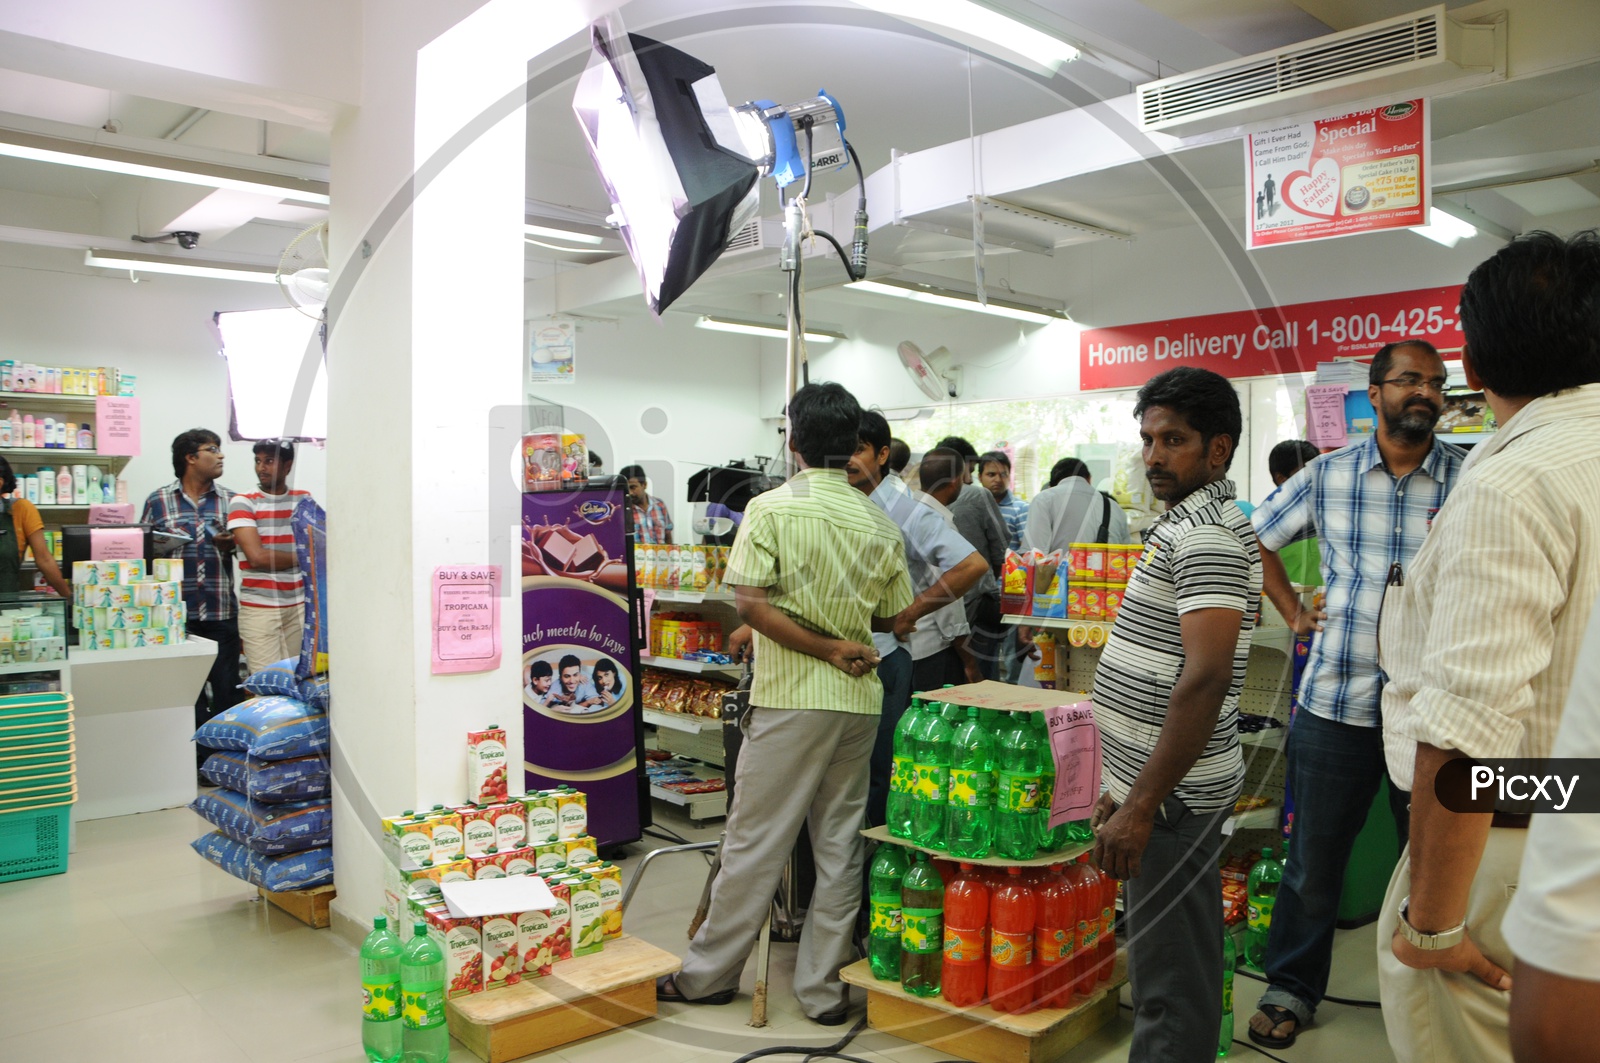 Movie Shooting In an Supermarket